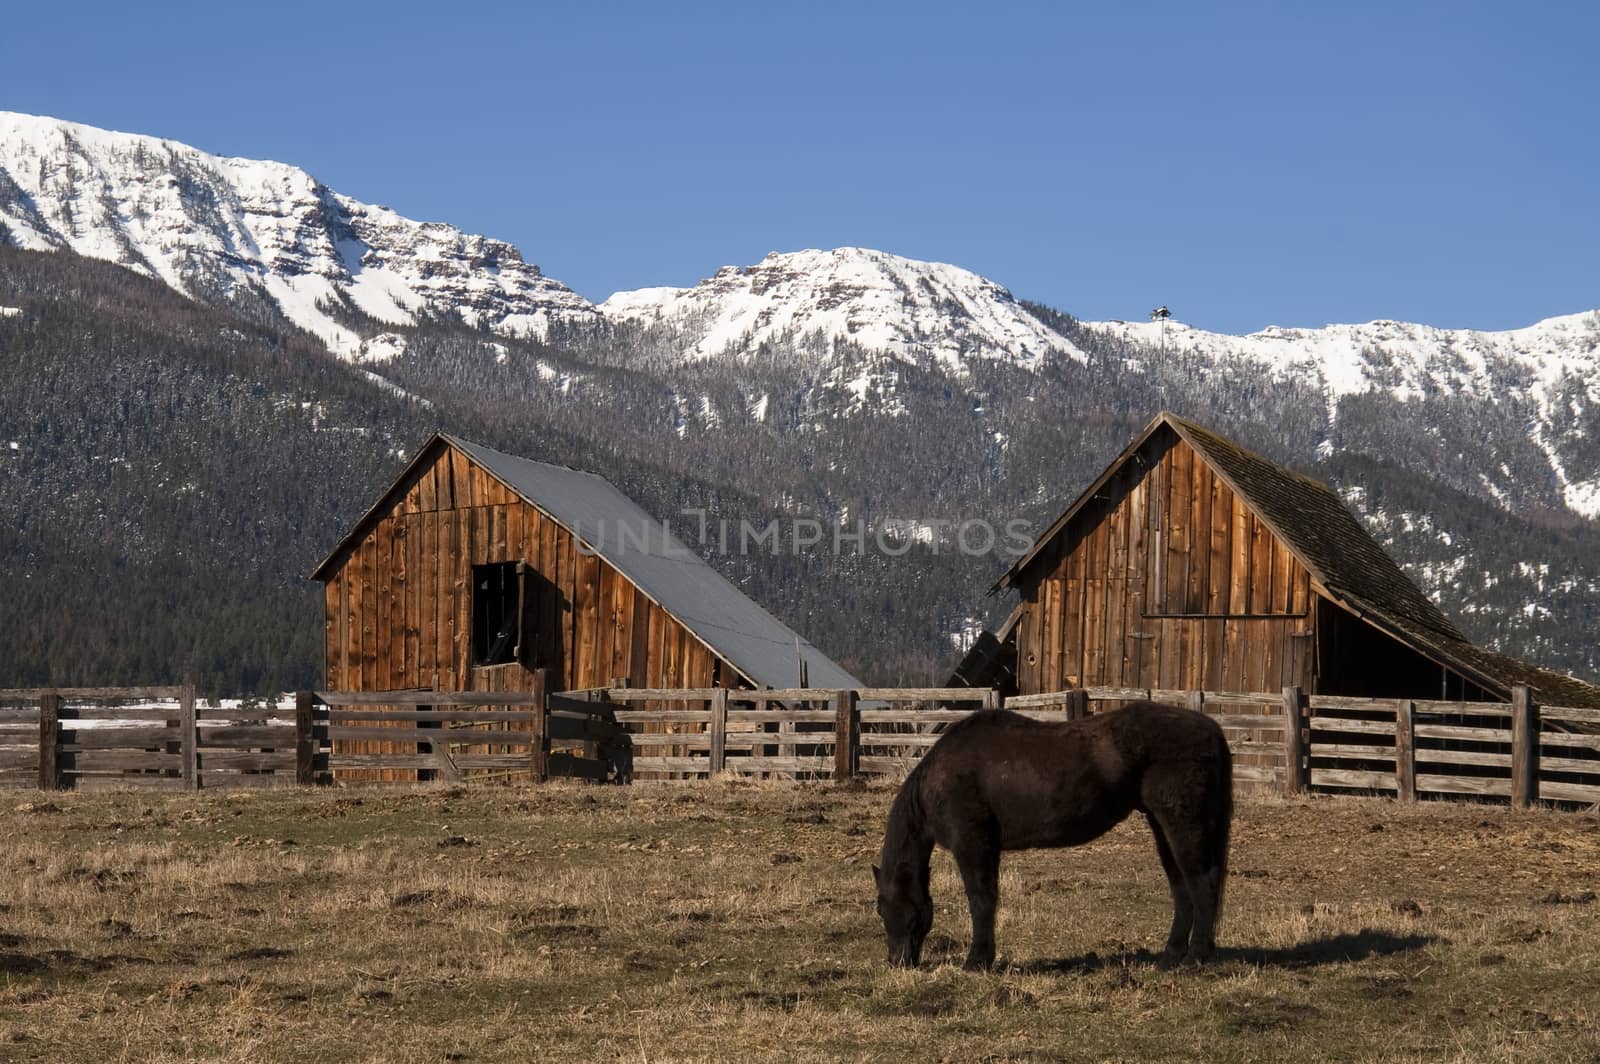 A lone horse grazes near barn in early morning on the ranch